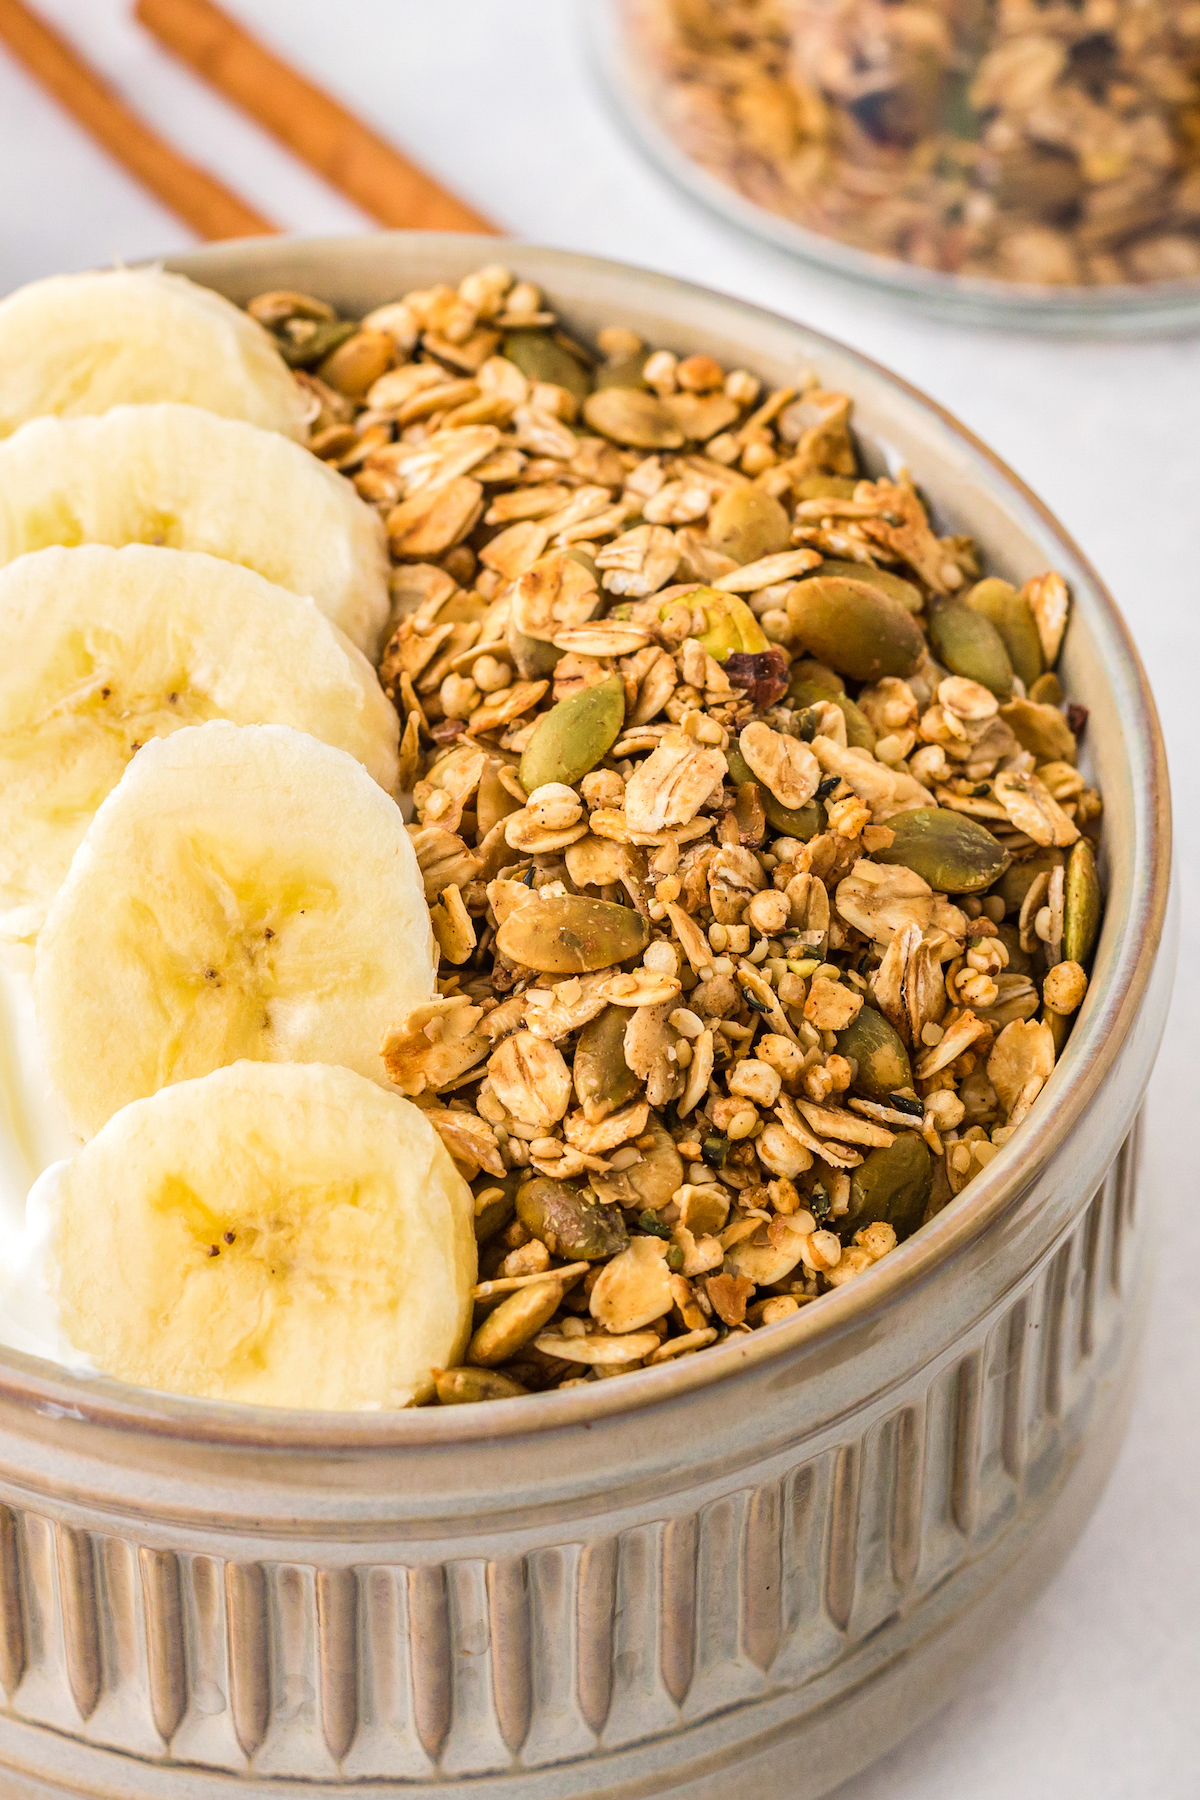 Homemade pumpkin spice granola served with banana slices in a bowl.